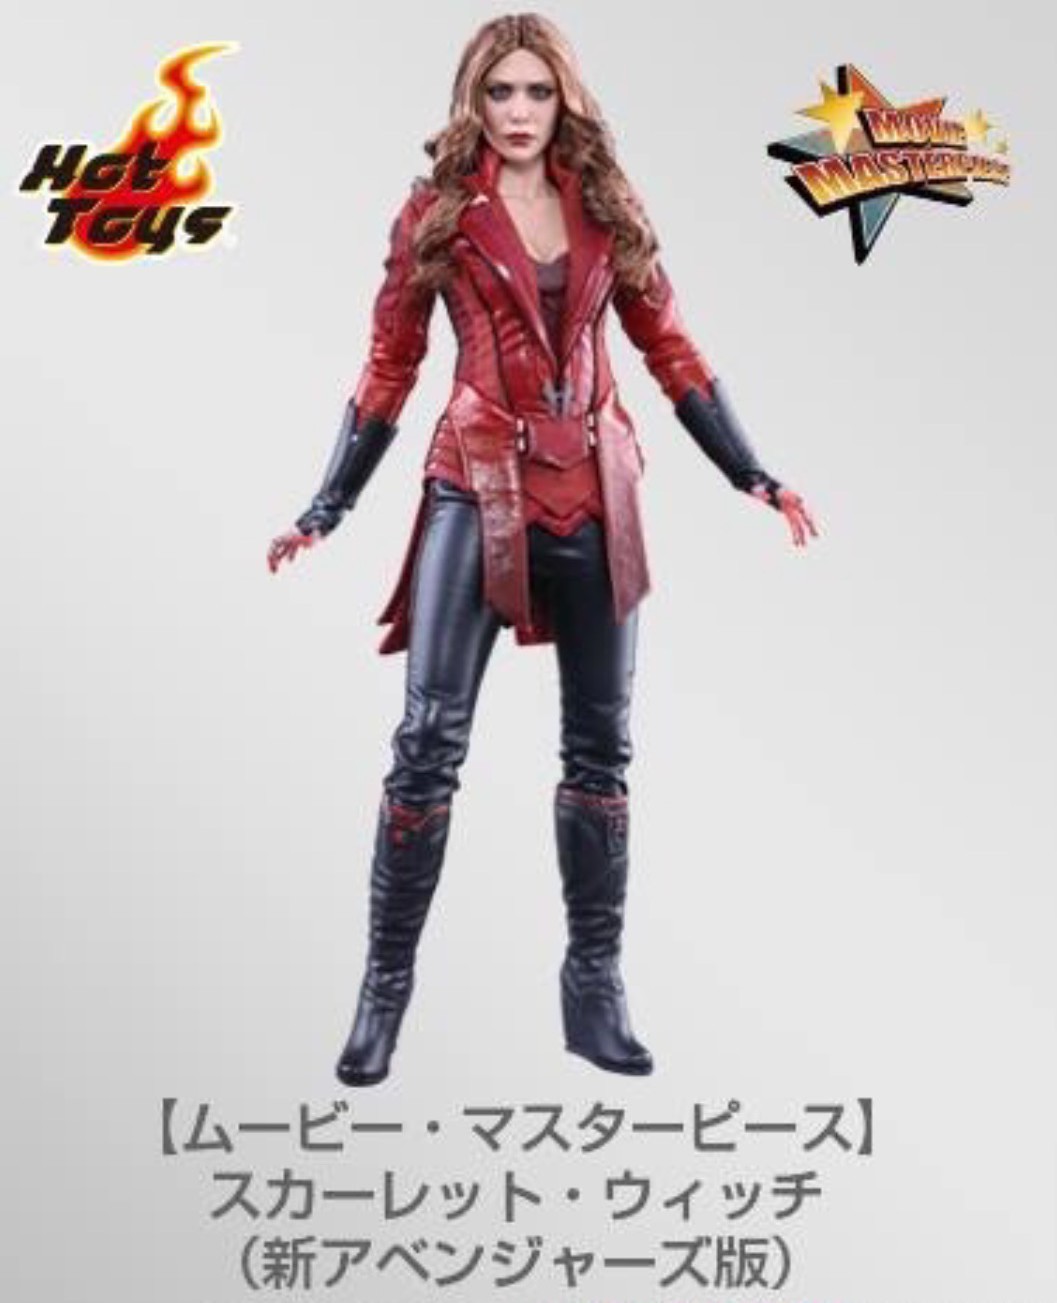 Hot Toys New Avengers Scarlet Witch Figure Movie Promo! - Marvel Toy News